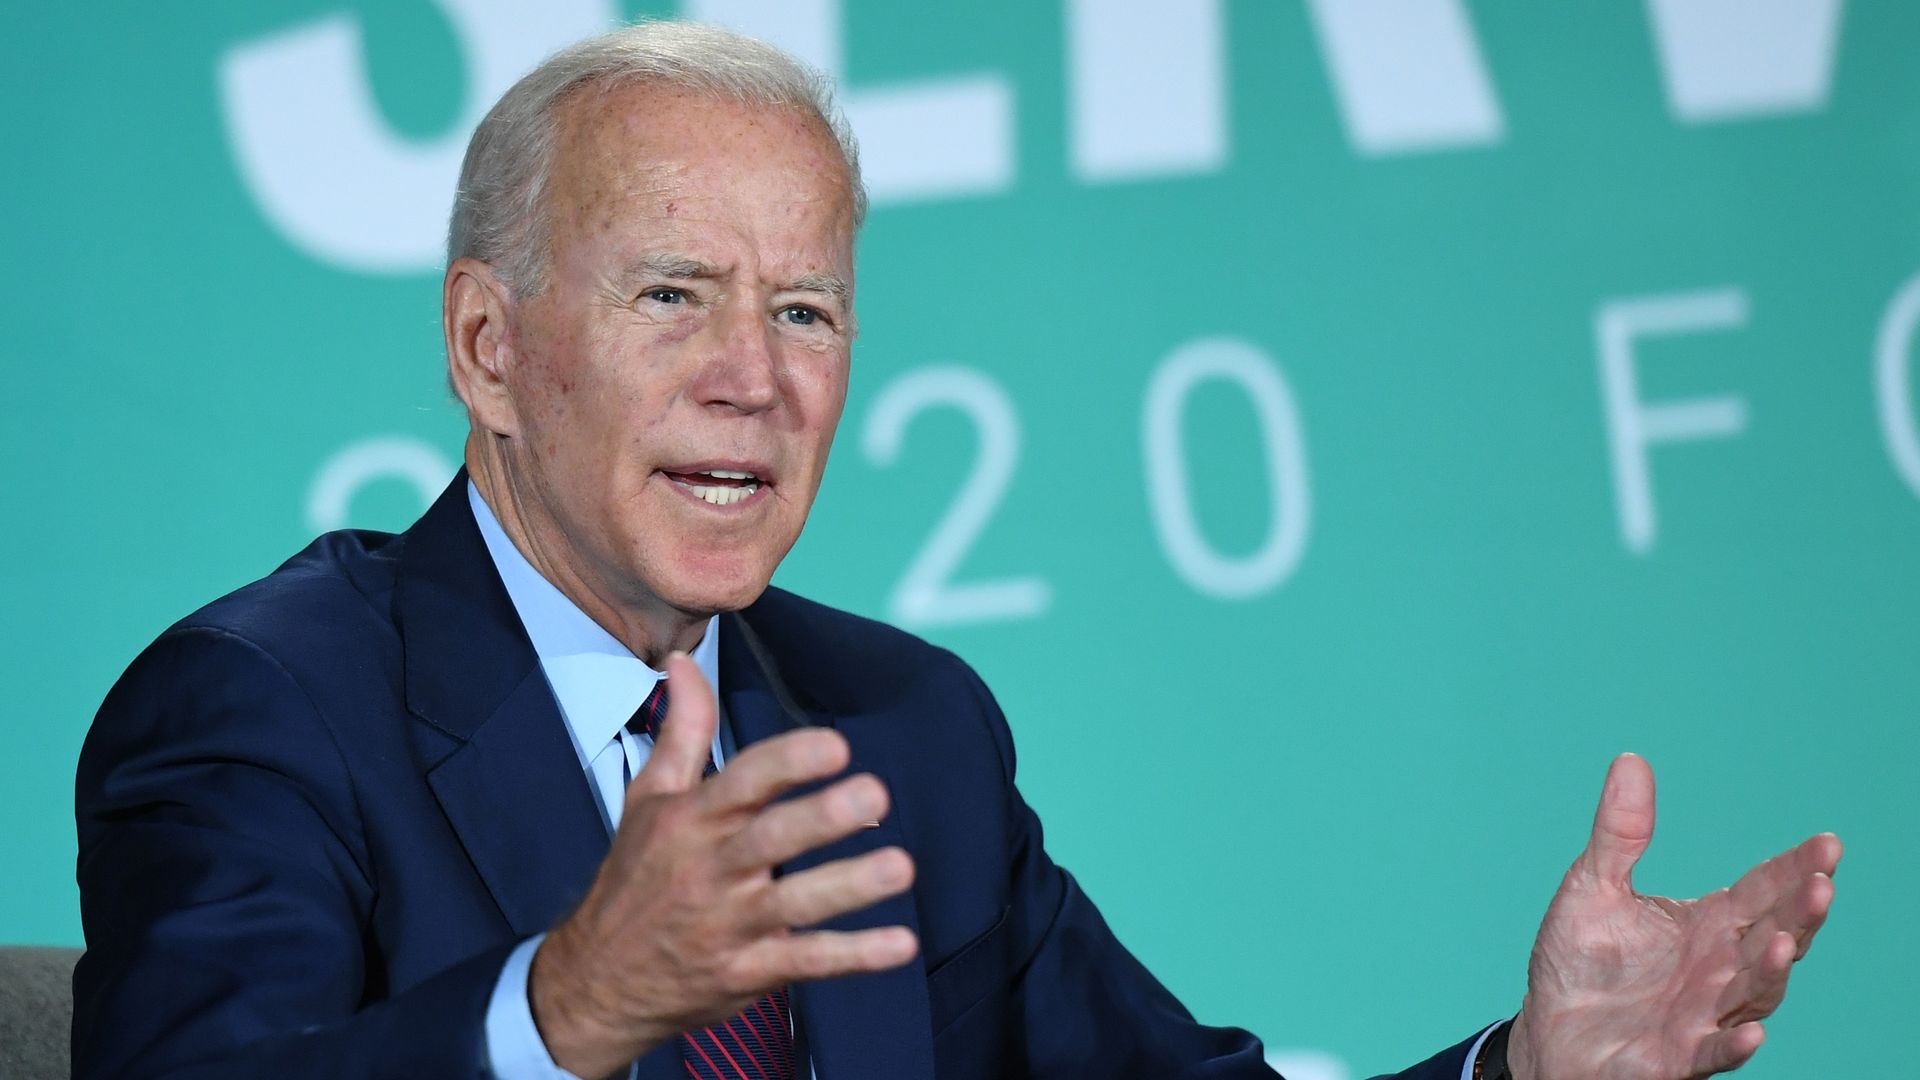  Democratic presidential candidate, former U.S. Vice President Joe Biden speaks during the 2020 Public Service Forum hosted by the AFSCME at UNLV on August 3